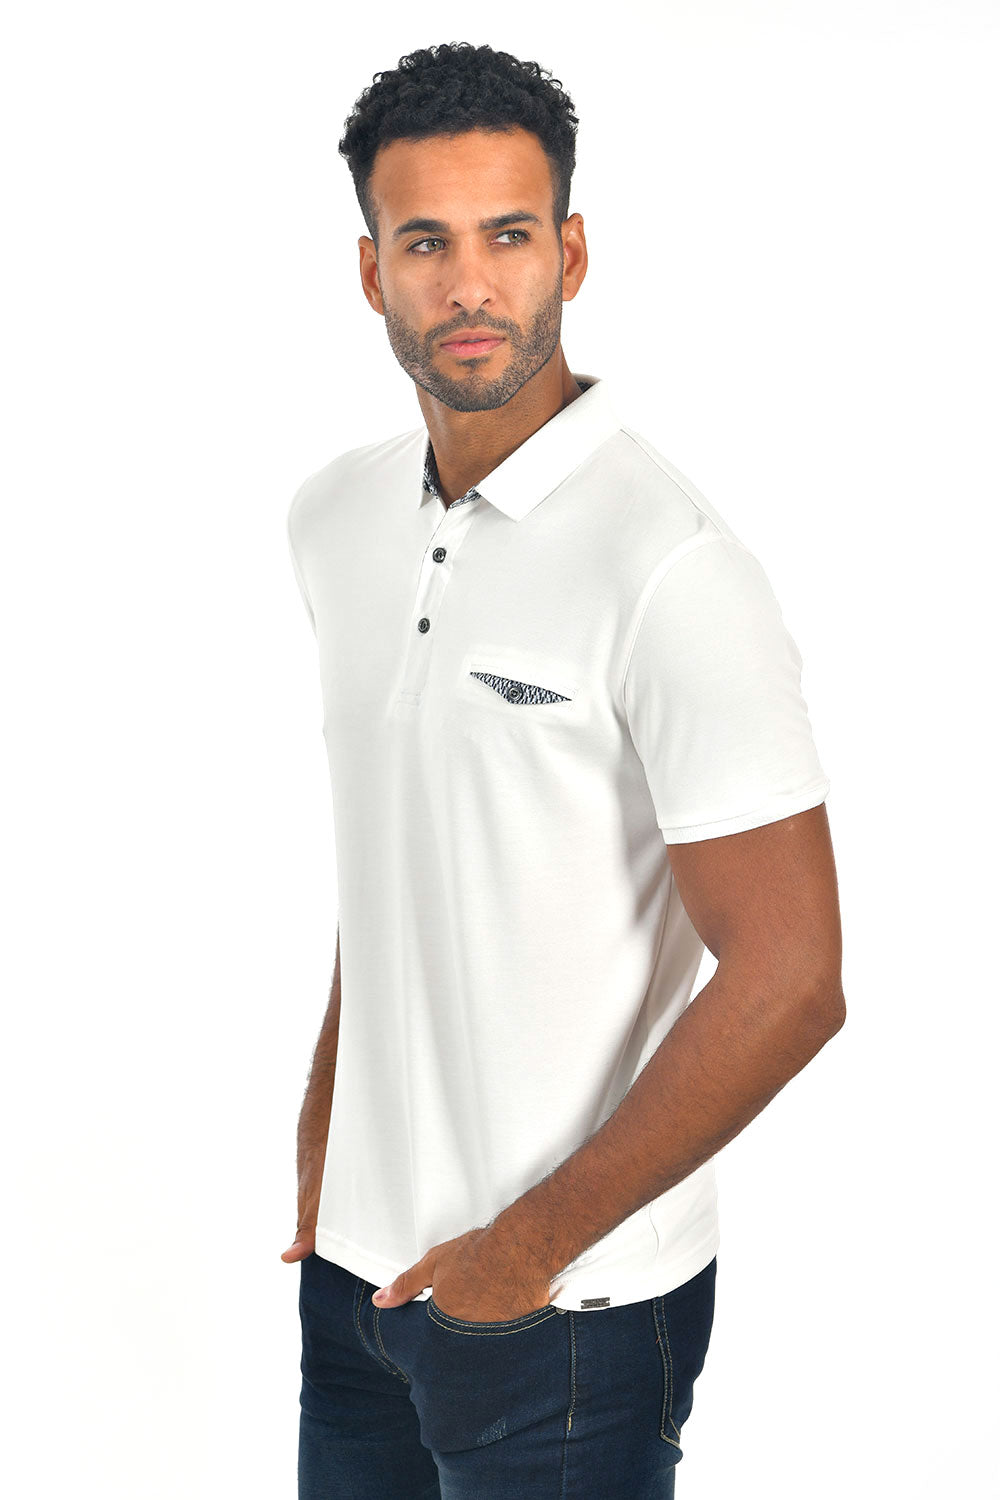 BARABAS Men's solid color Polo shirts with pocket White colors PP817